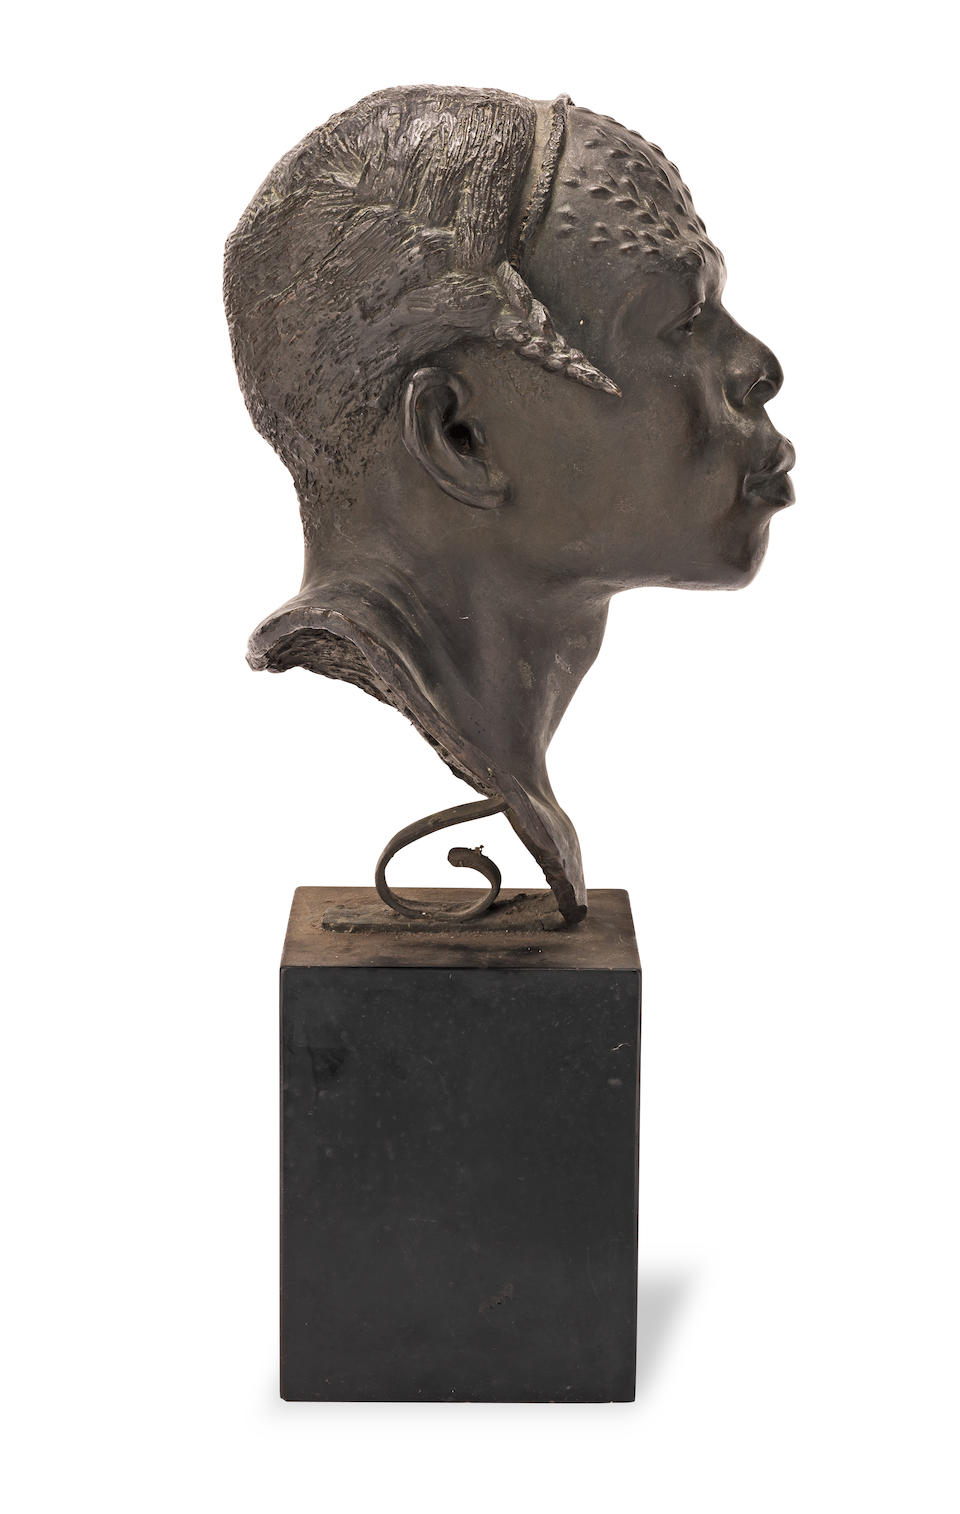 Herbert Ward (British, 1863-1919): A patinated bronze bust of a native African head entitled  'An Aruimi Type' with direct provenance to Herbert and Sarita Ward